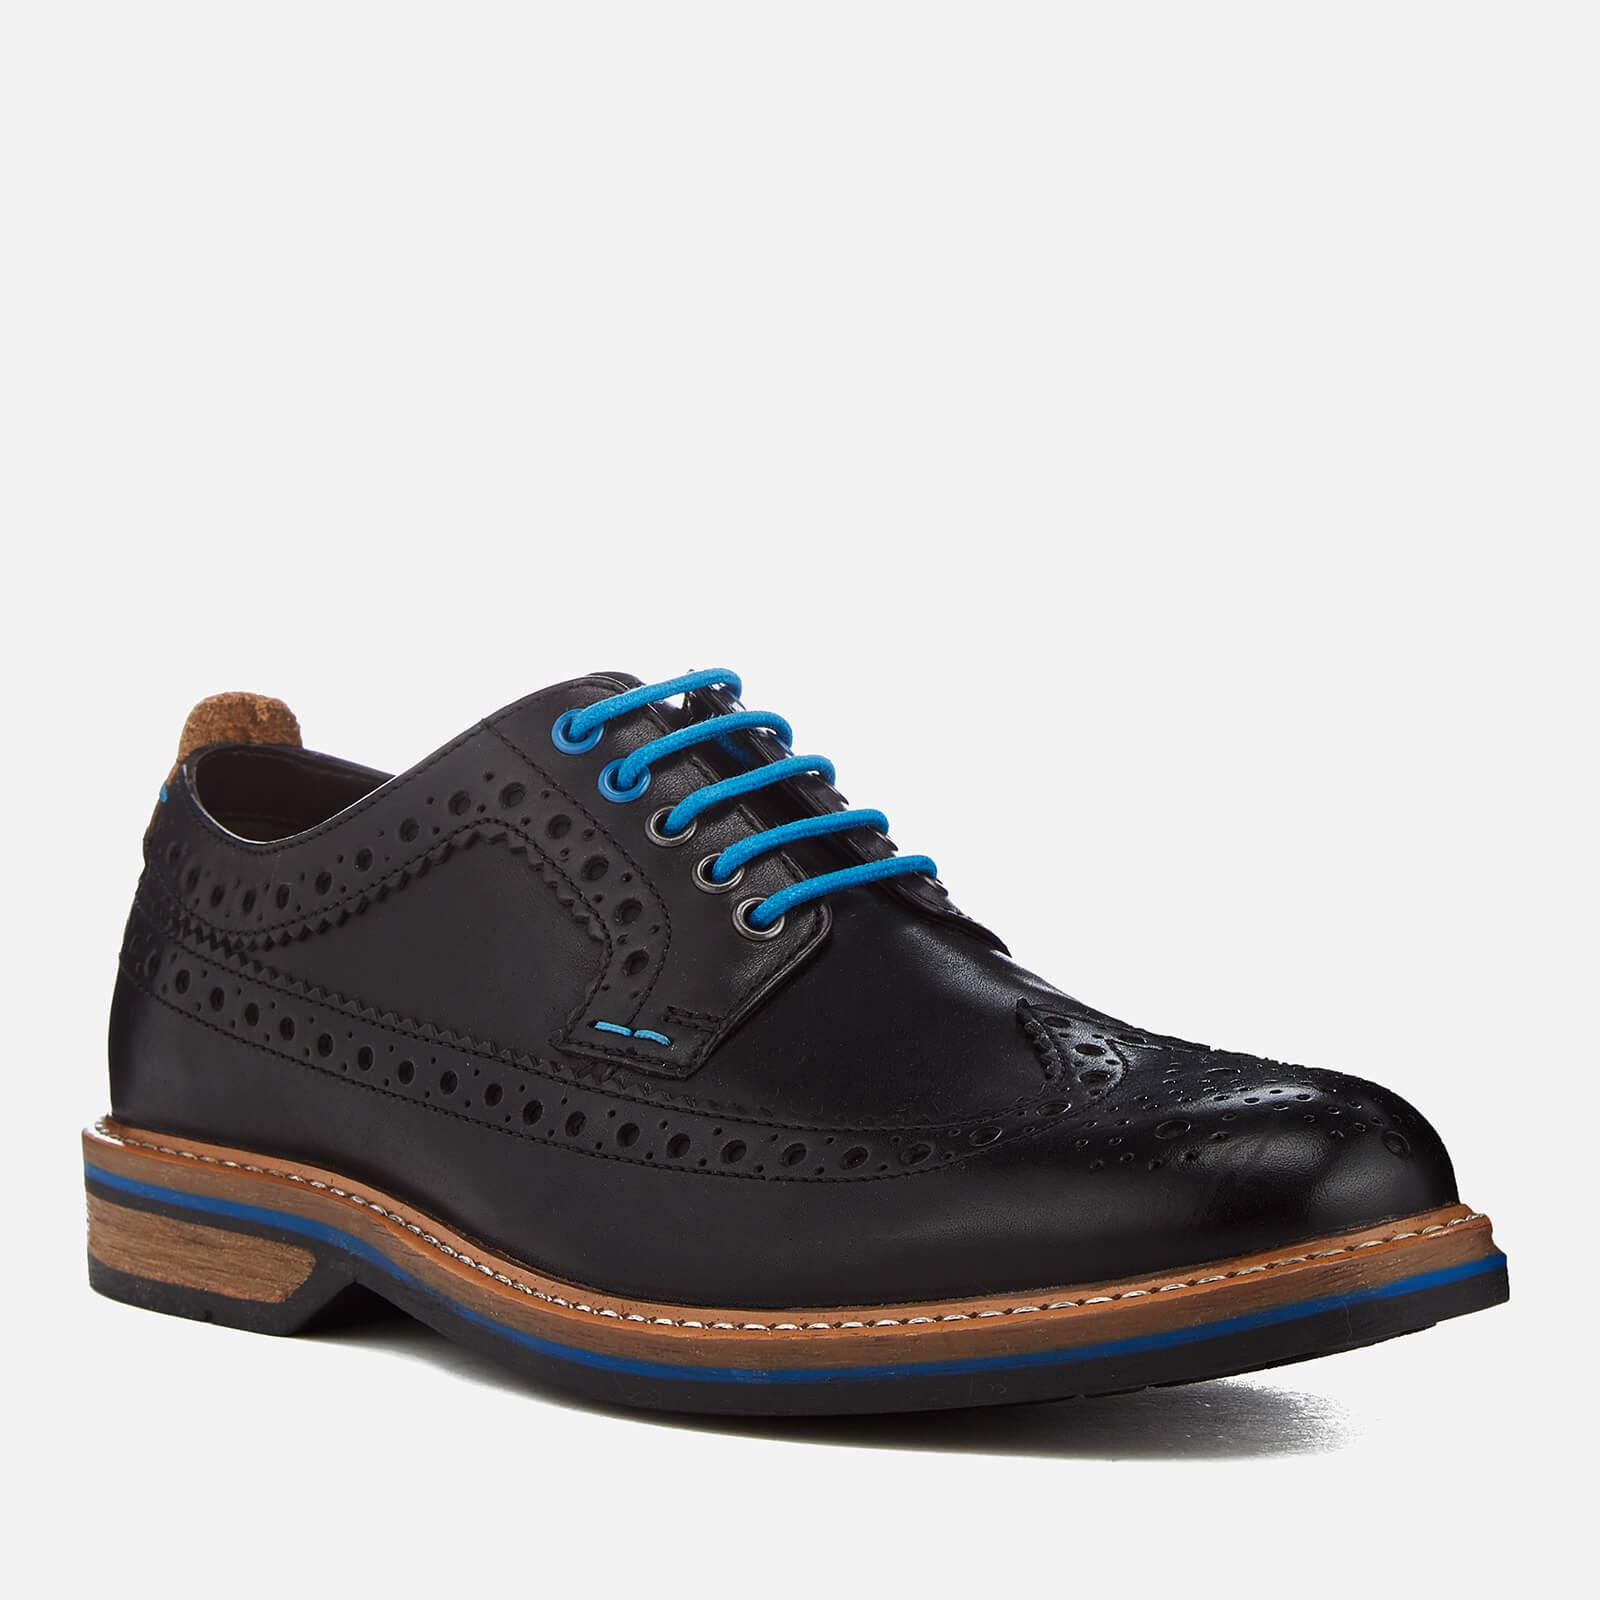 Clarks Men's Pitney Limit Leather Brogues in Black for Men - Lyst